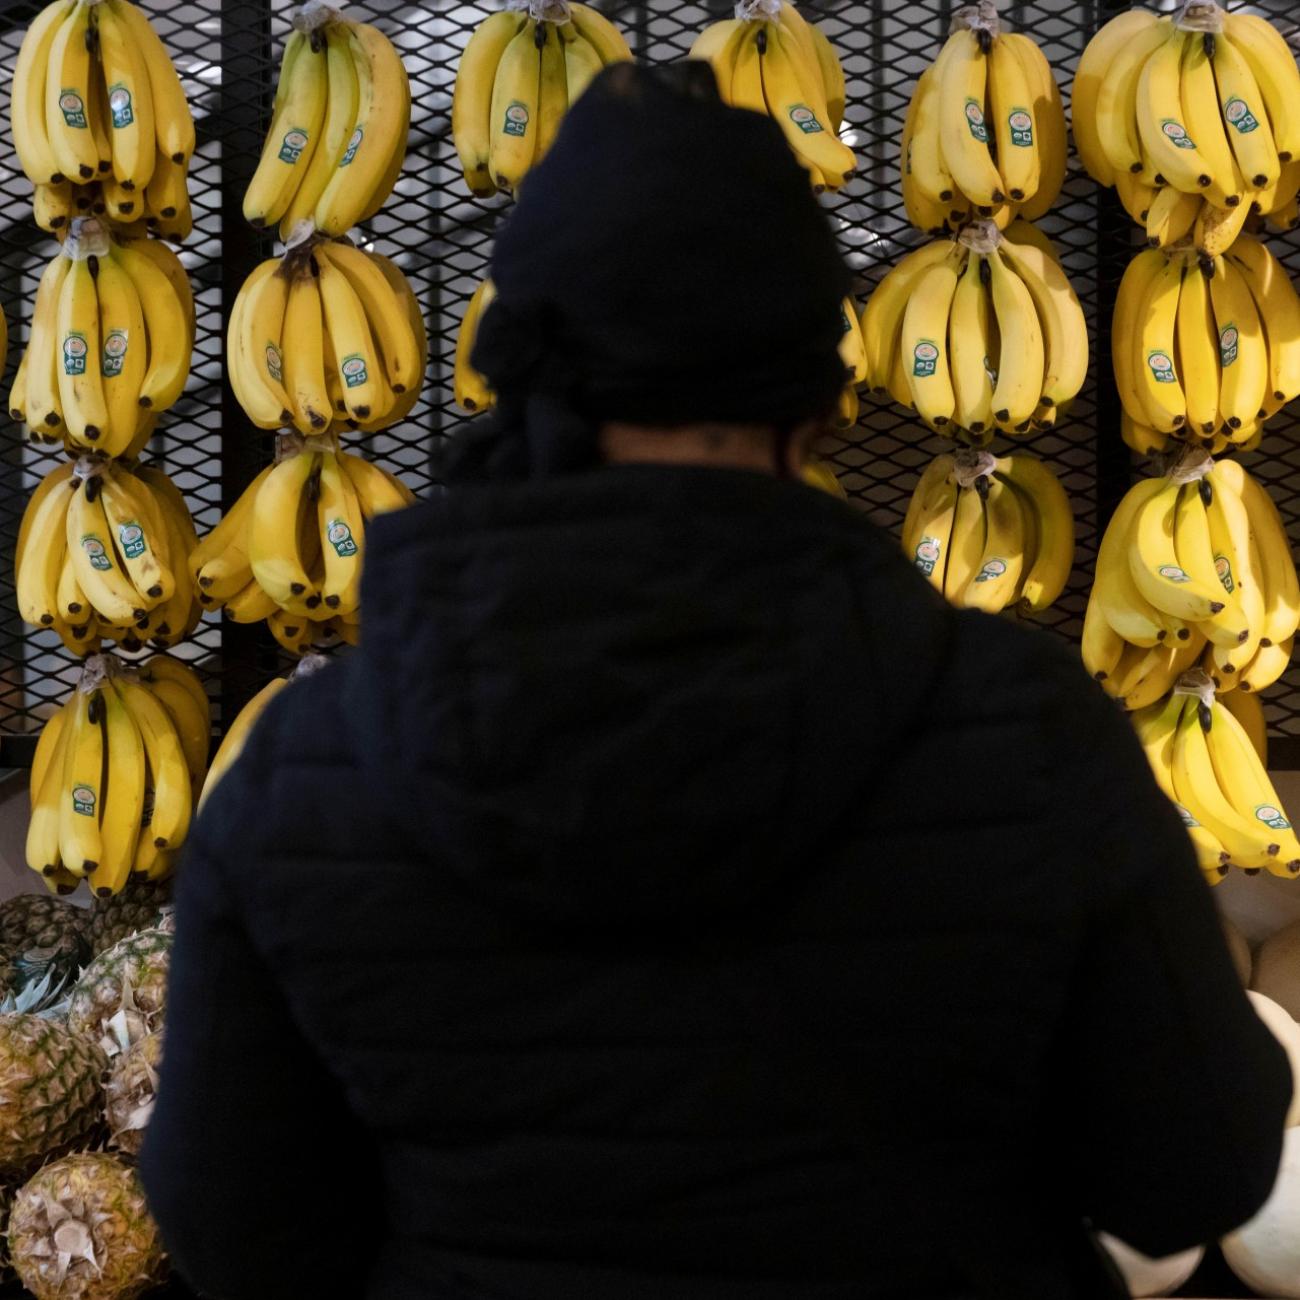 A person shops in a supermarket selling fruit and vegetables in Manhattan, New York City, on March 28, 2022